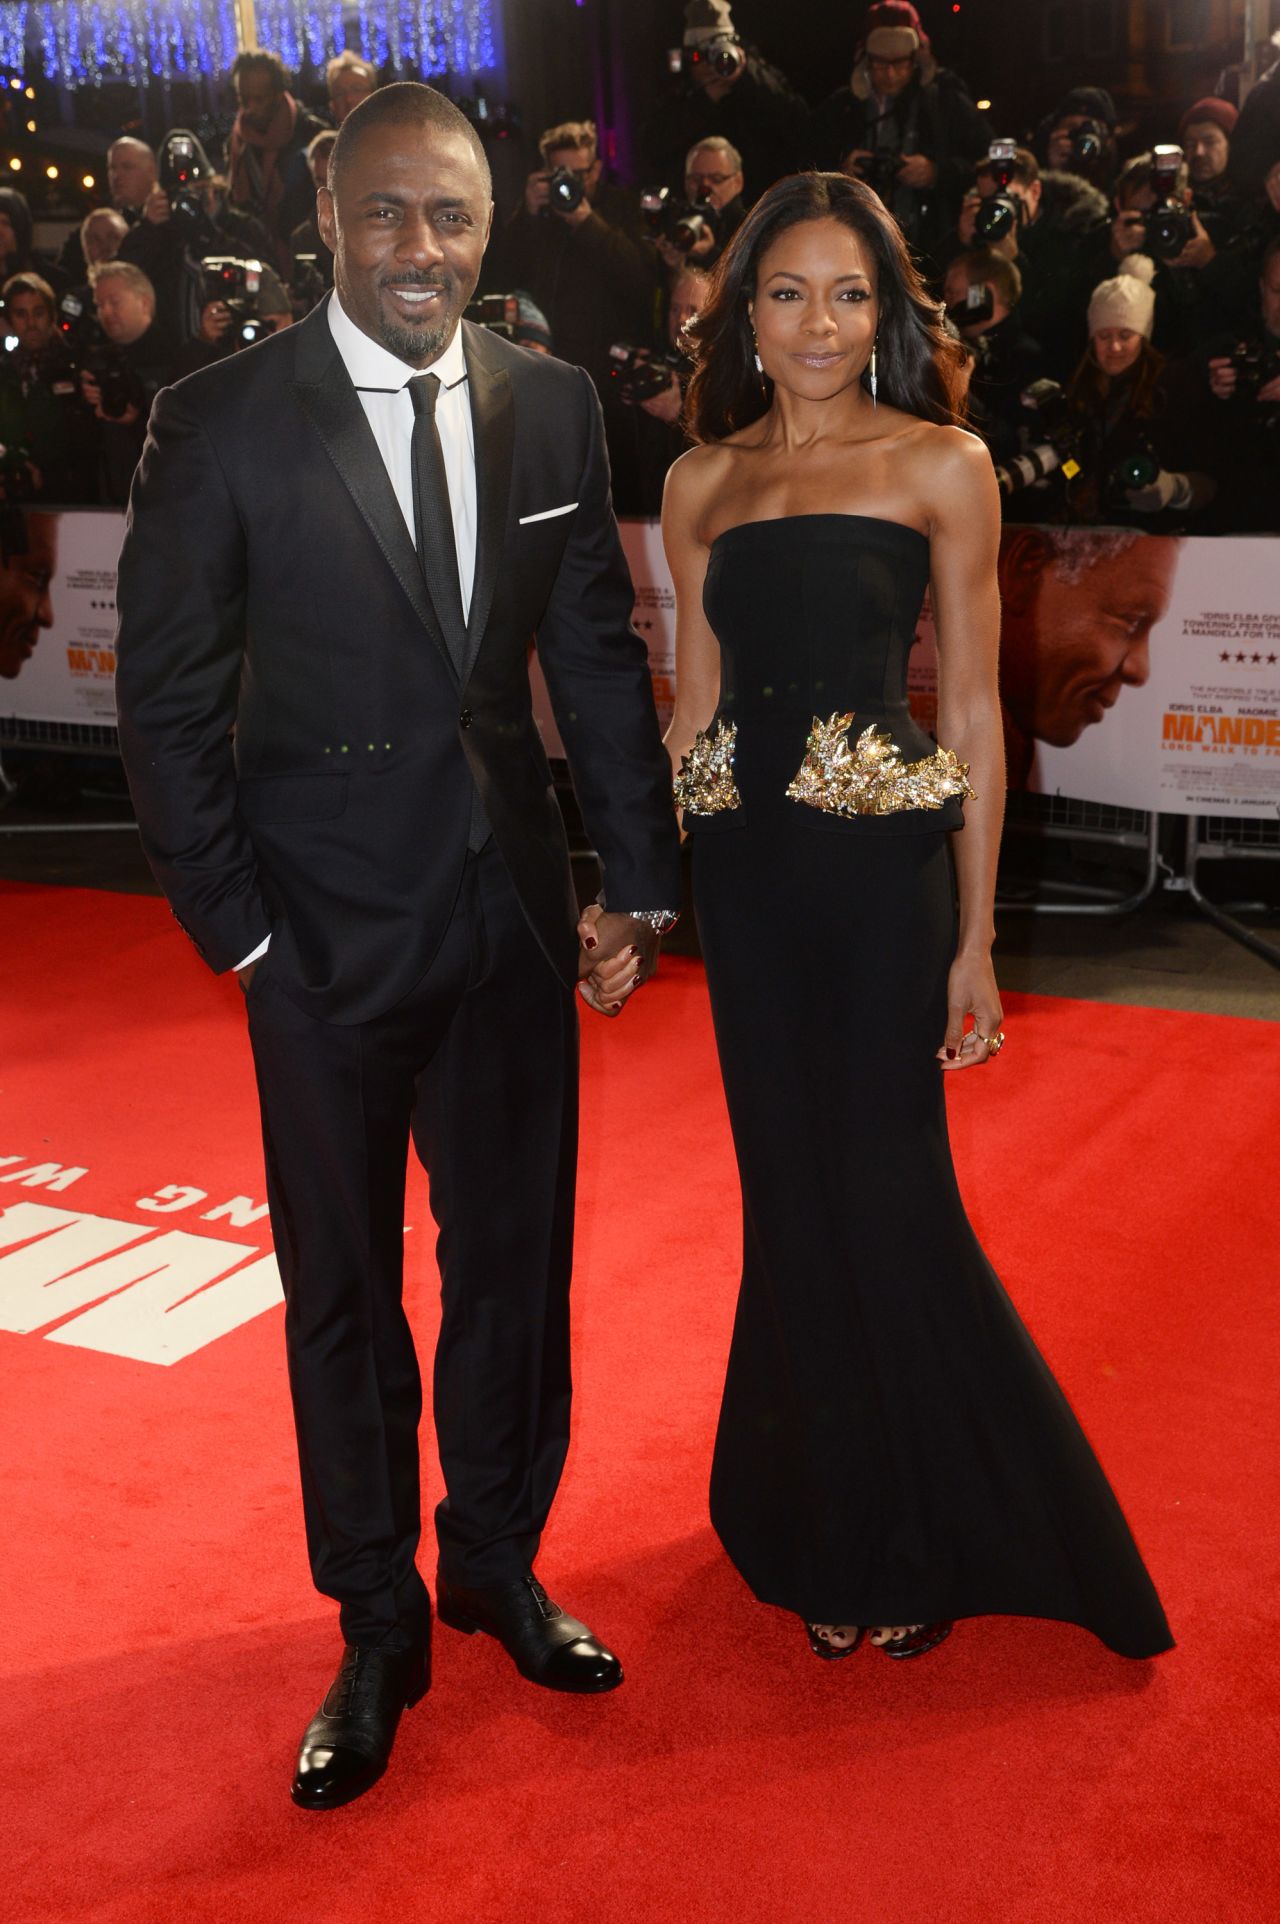 Idris Elba and Naomie Harris put on their finest duds for the London premiere of "Mandela: Long Walk to Freedom."